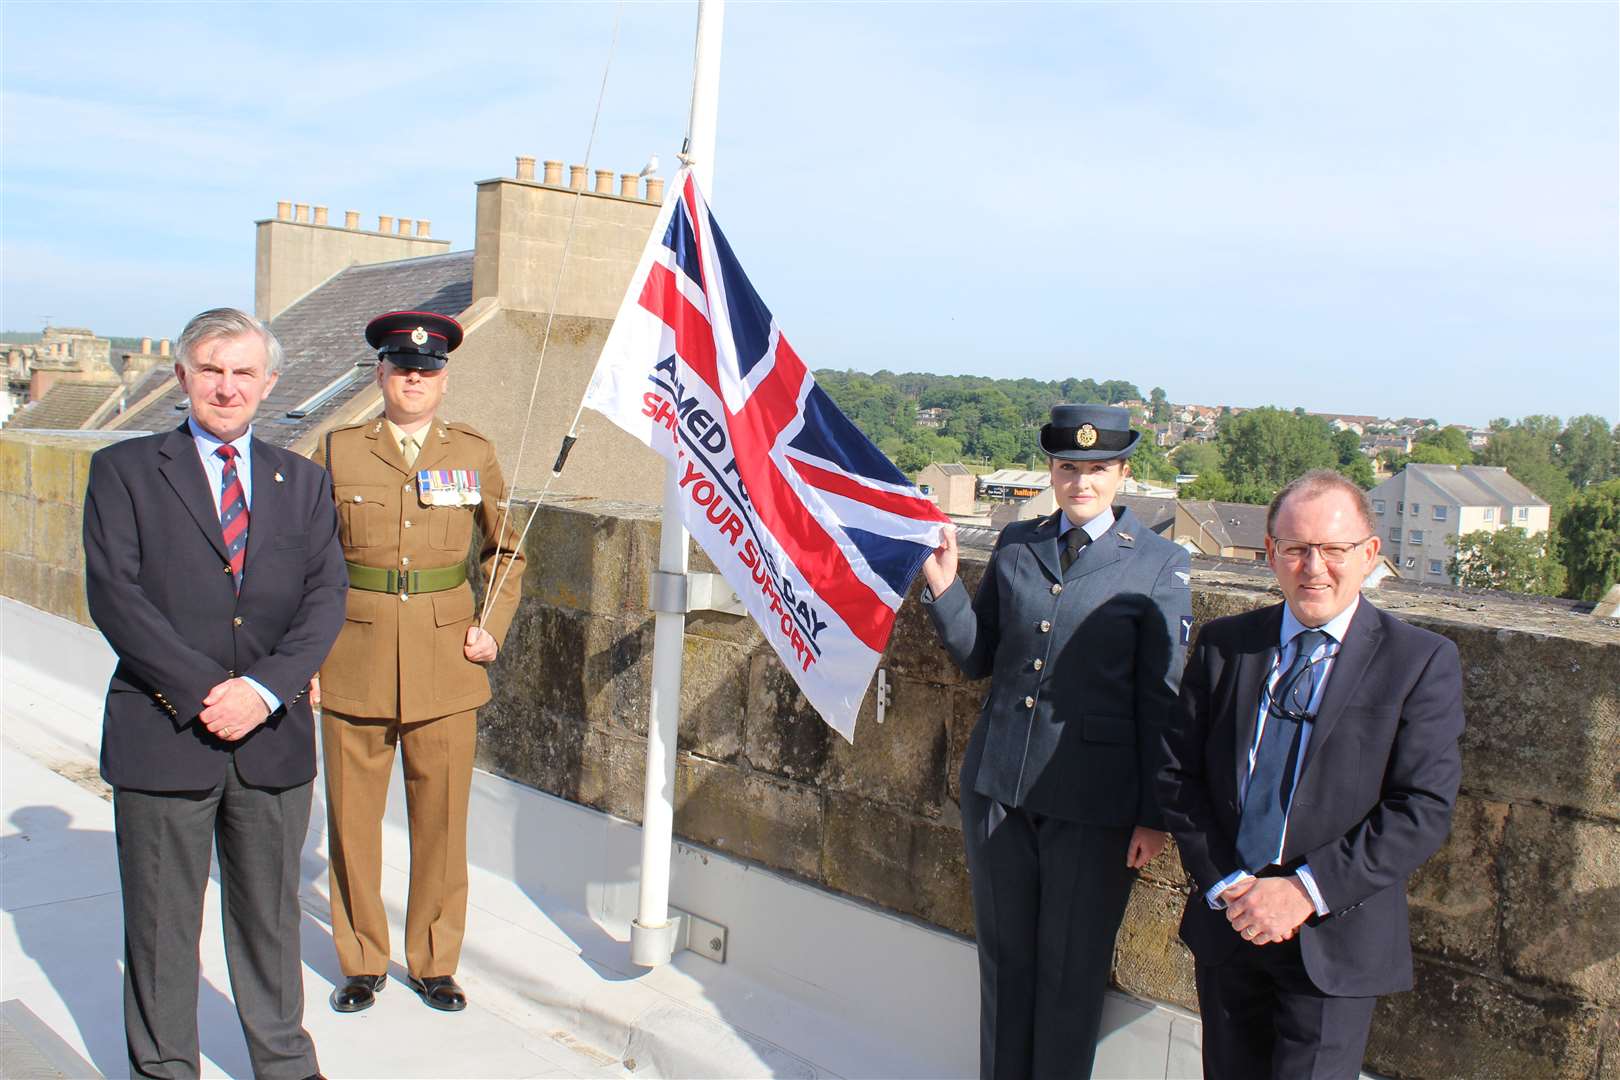 Moray Council’s Armed Forces Champion, Cllr Donald Gatt (left) – himself an RAF veteran – hoisted the flag above the council HQ in Elgin, assisted by Lance Corporal Robinson from 39 Engineer Regiment at Kinloss, SAC Katherine Audin from RAF Lossiemouth and Moray Council chief executive Roddy Burns